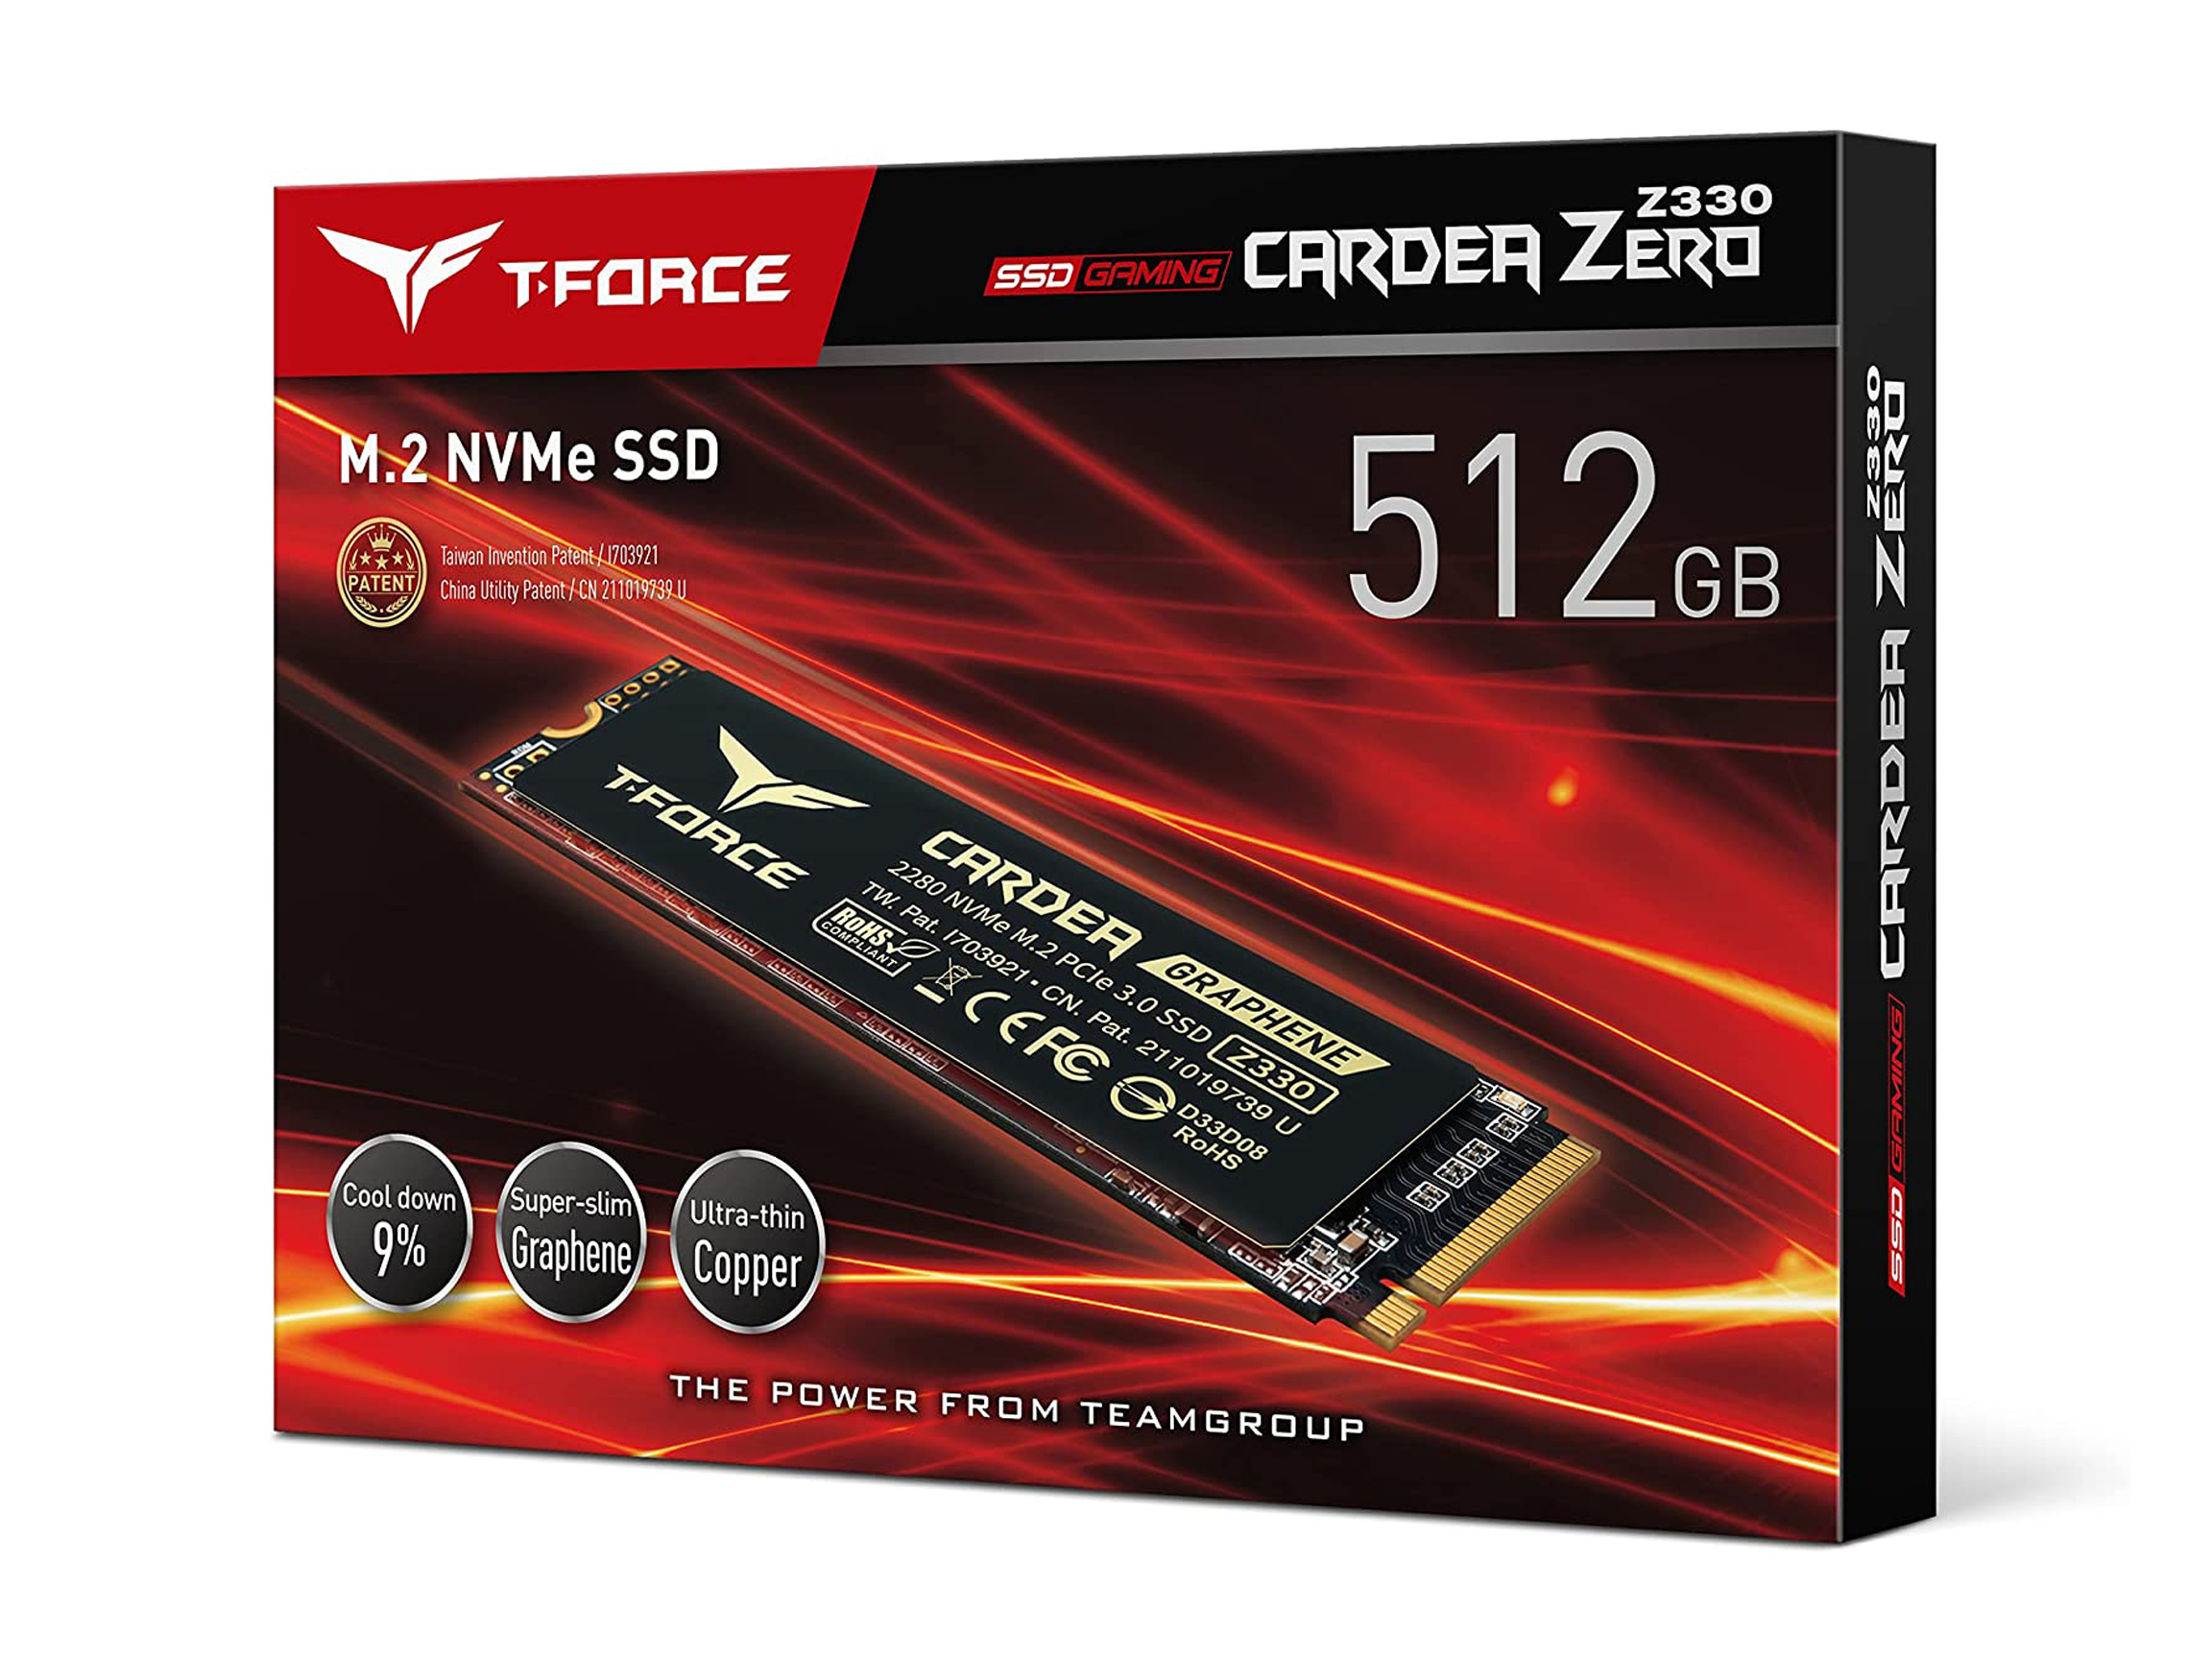 Team Group T-FORCE CARDEA ZERO Z330 M.2 2280 512GB PCIe Gen3 x4 with NVMe 1.3 Internal Solid State Drive (SSD) TM8FP8512G0C311